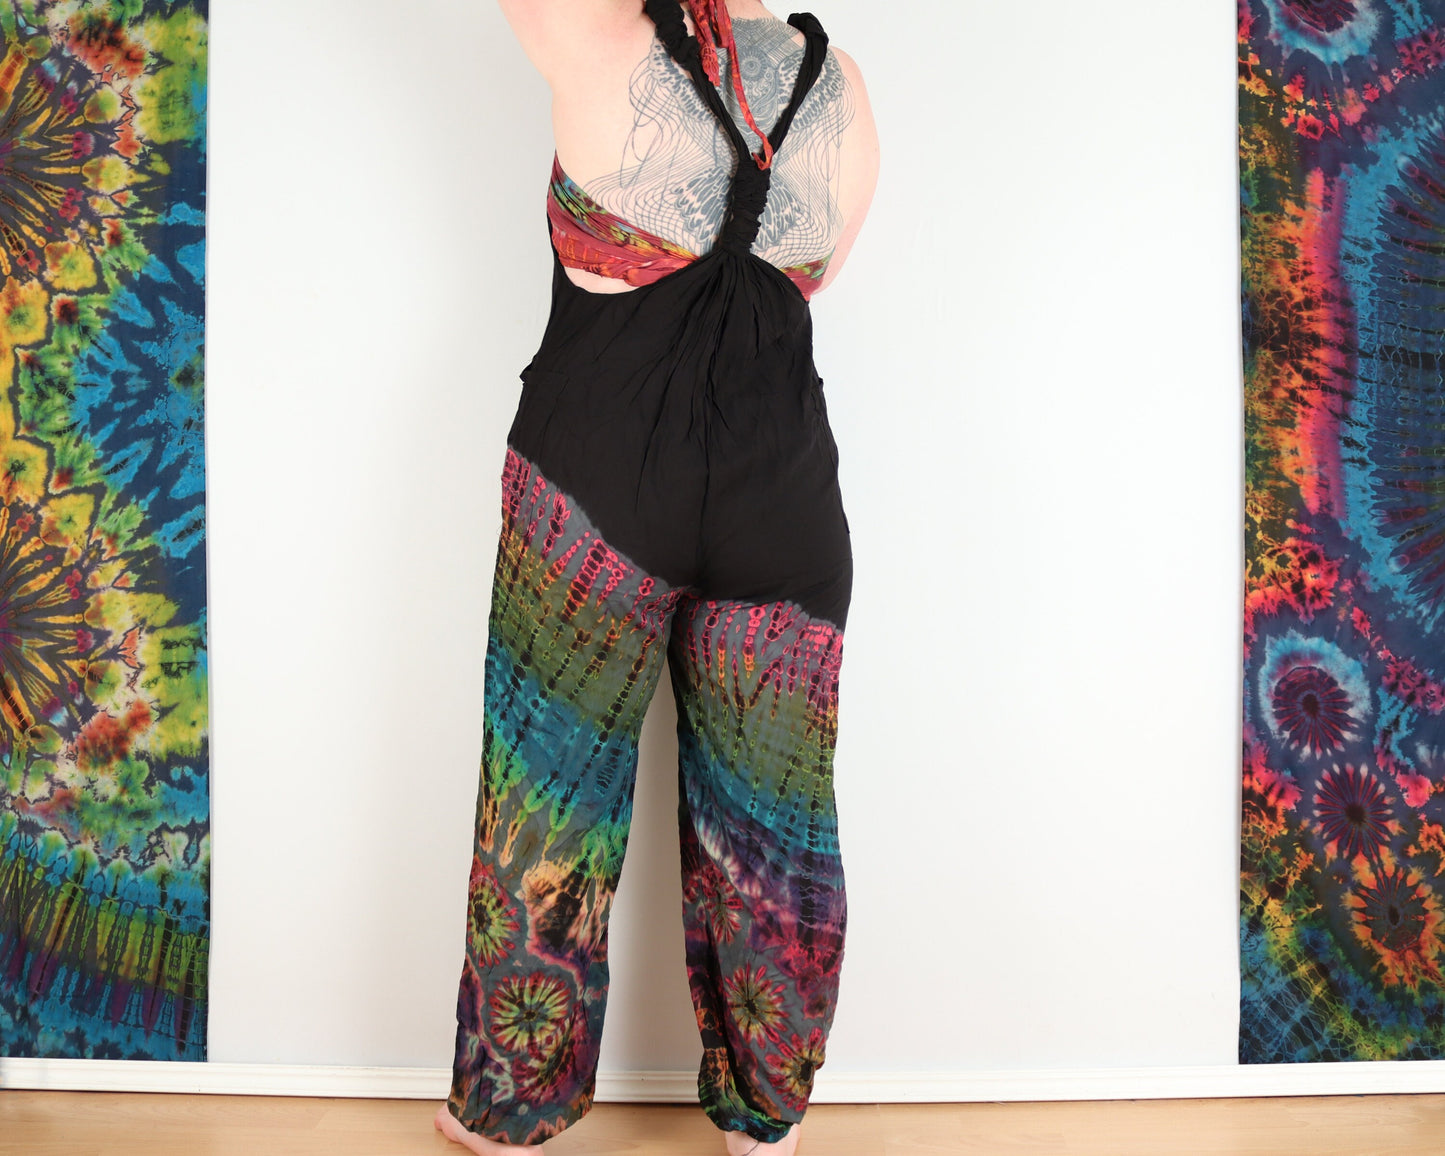 Half Tie-Dye Dungarees - Black and Grey - Bare Canvas